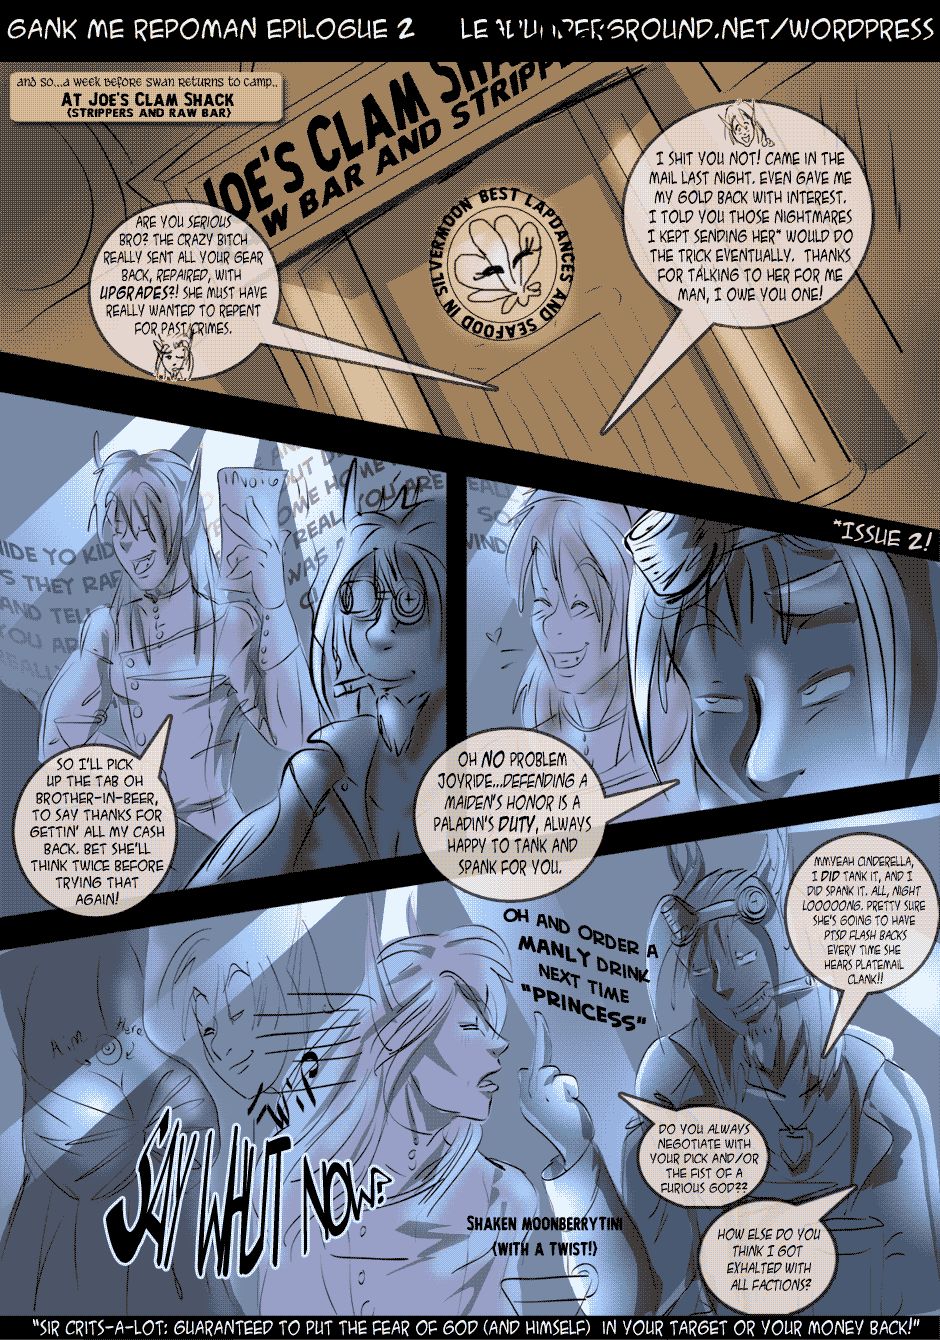 Gank Me Issue 5 Repoman page 2